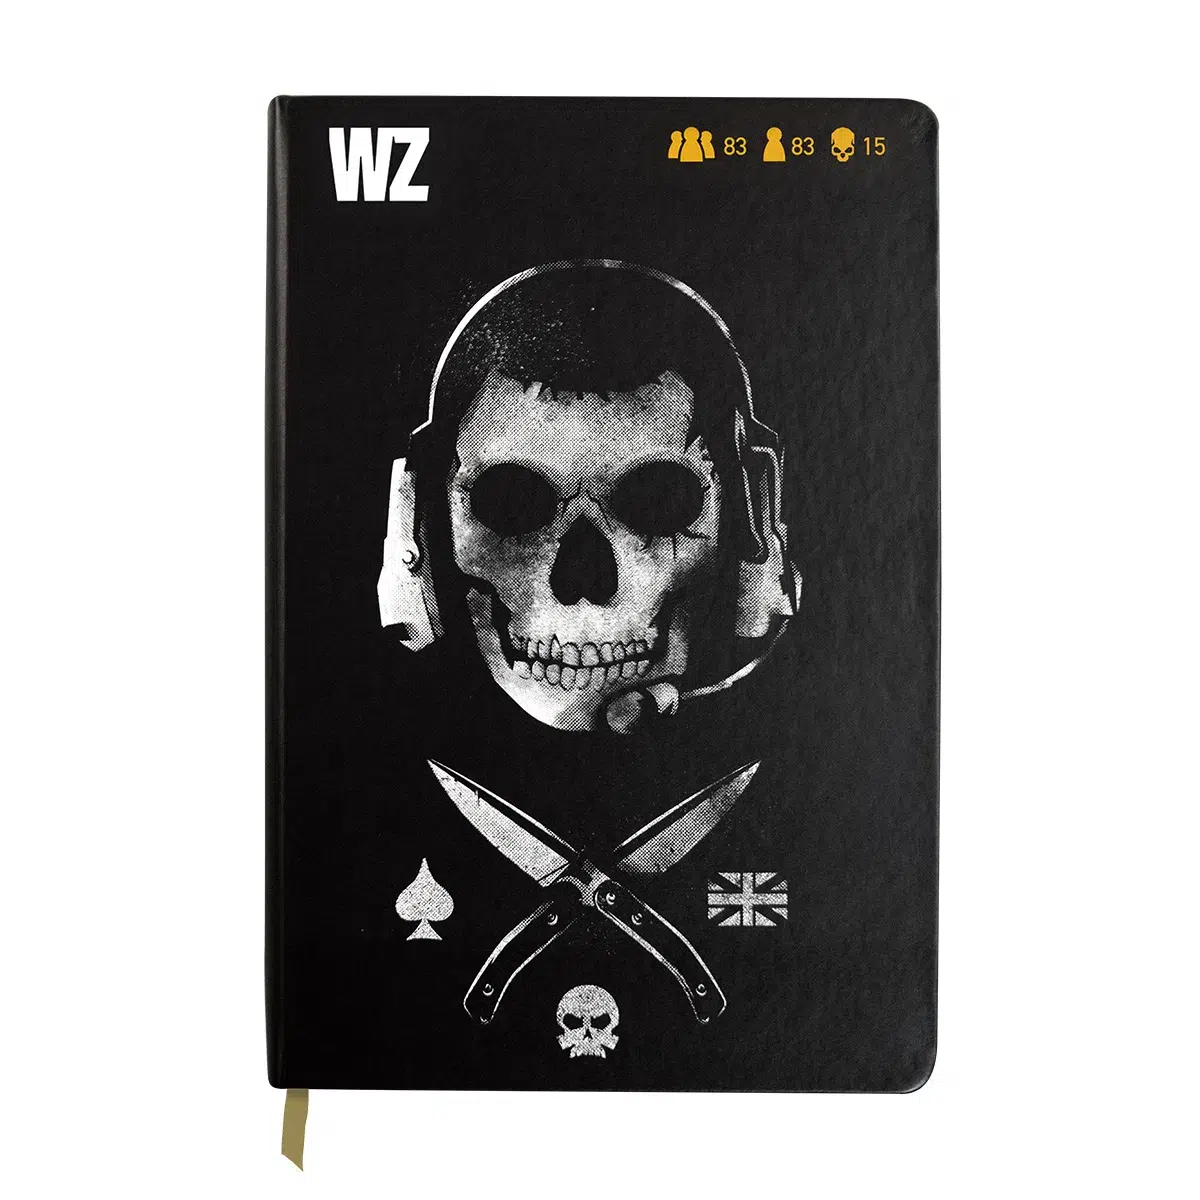 Call of Duty Warzone Notebook "Ghost"